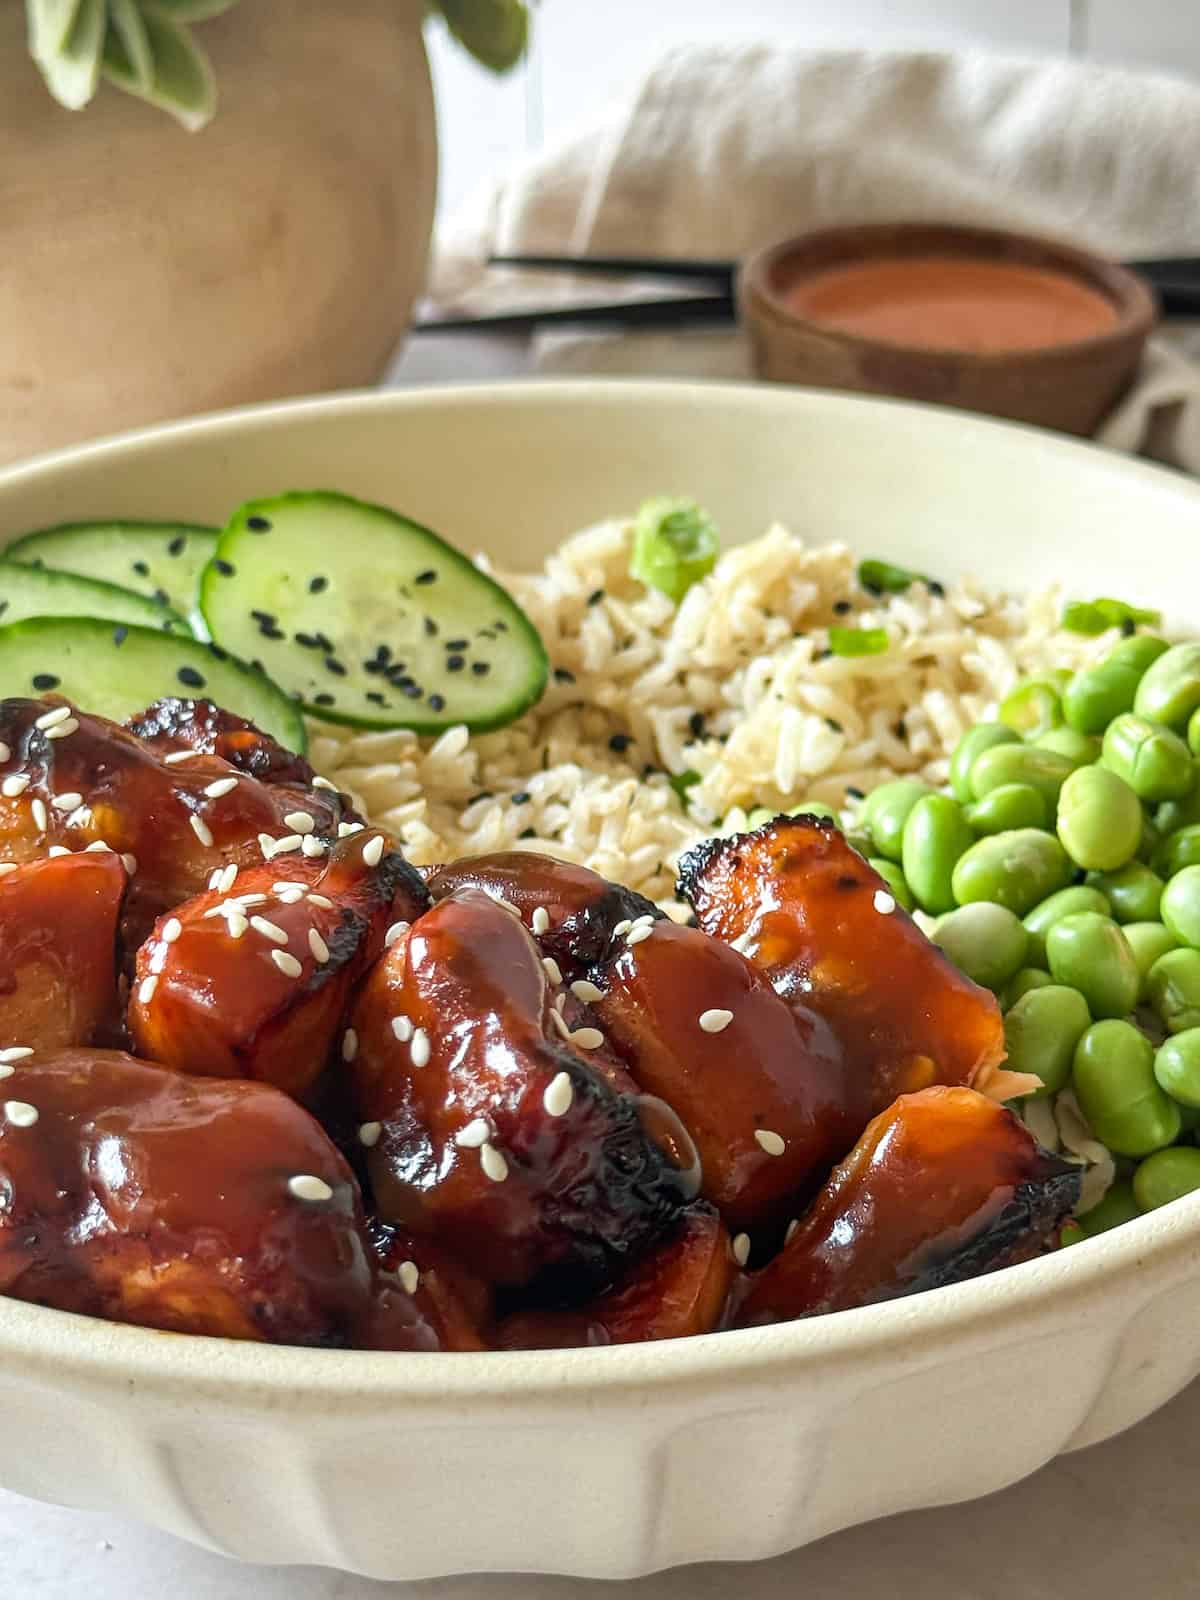 Honey garlic salmon bites in a bowl with edamame, brown rice, and cucumber.